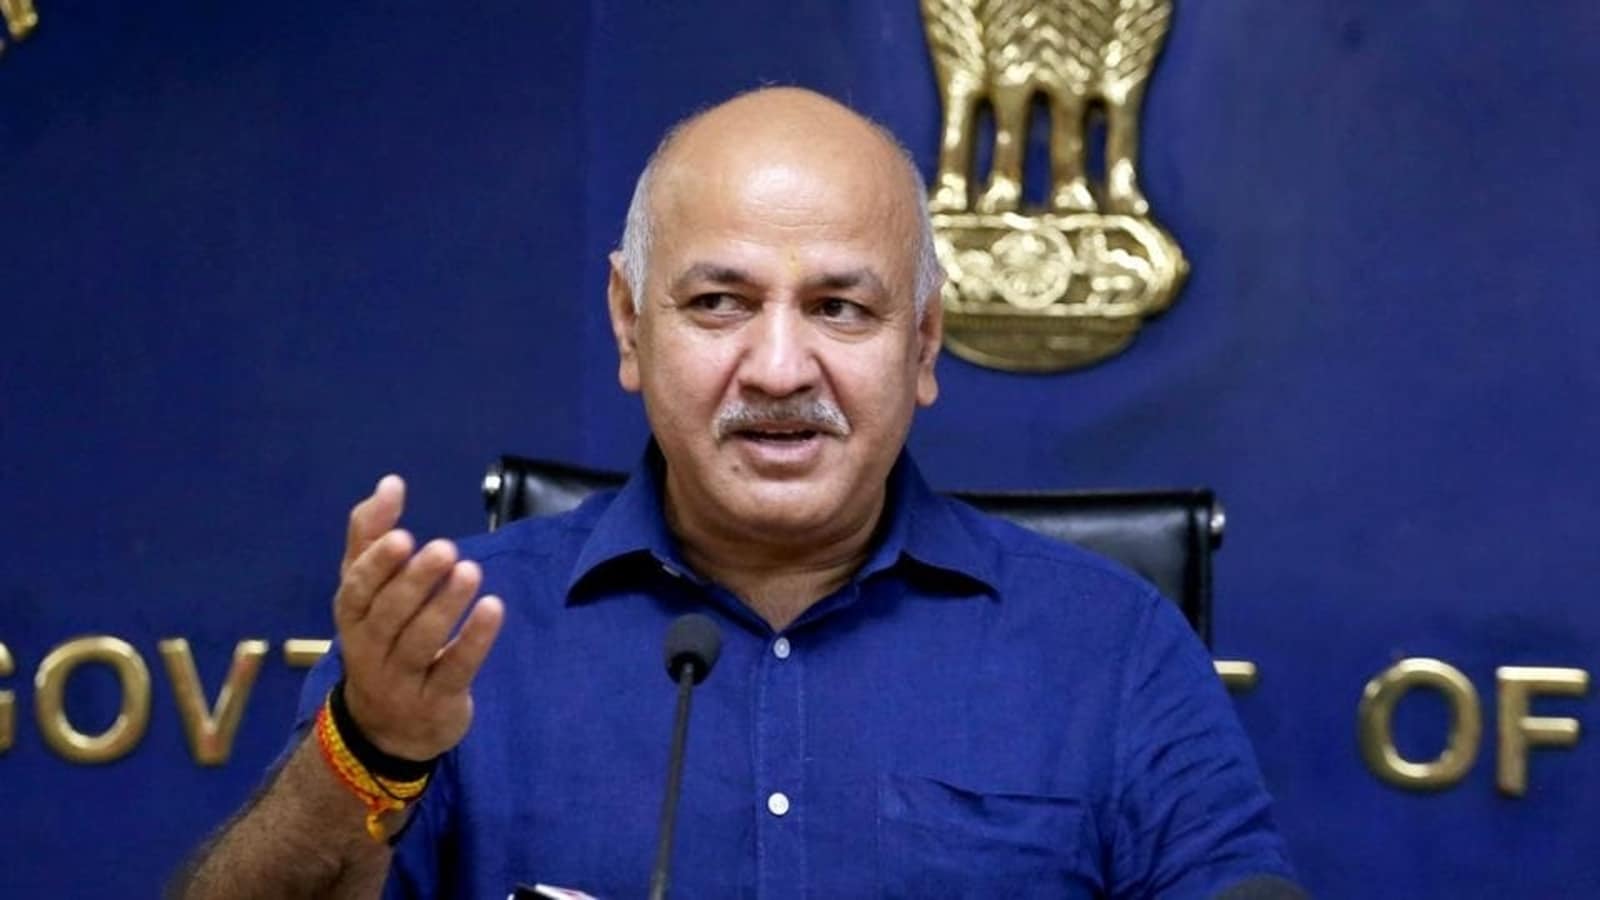 Student now seeing themselves as ‘future of the country’: Sisodia